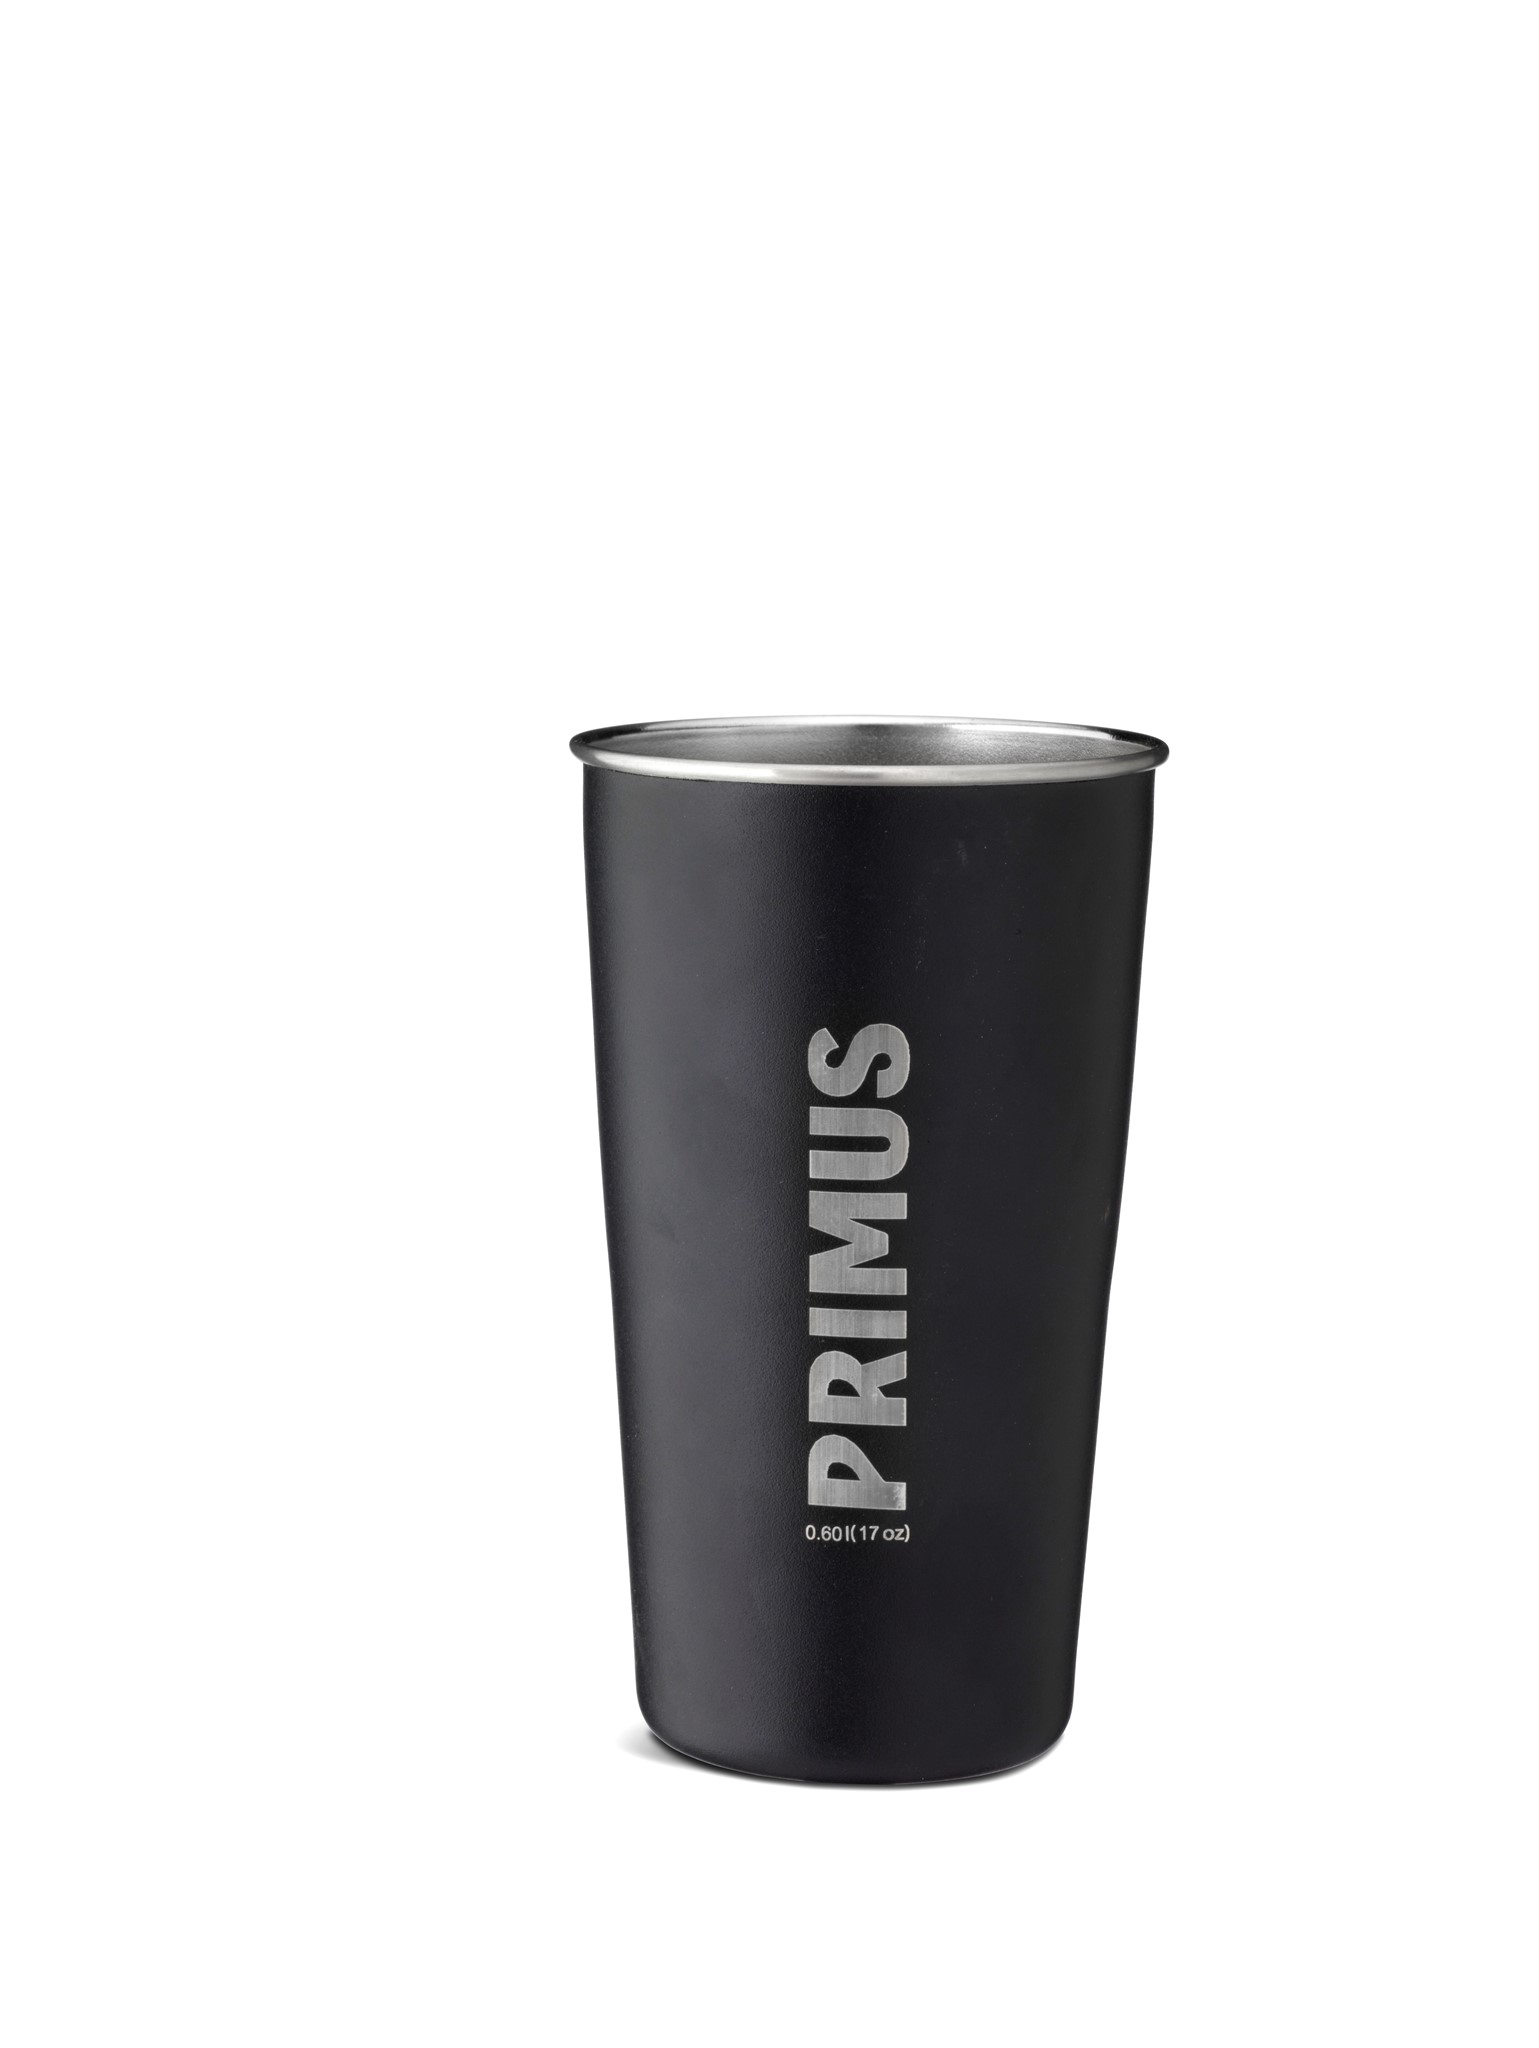 Picture of Primus - CampFire Pint Stainless Steel Mug Black